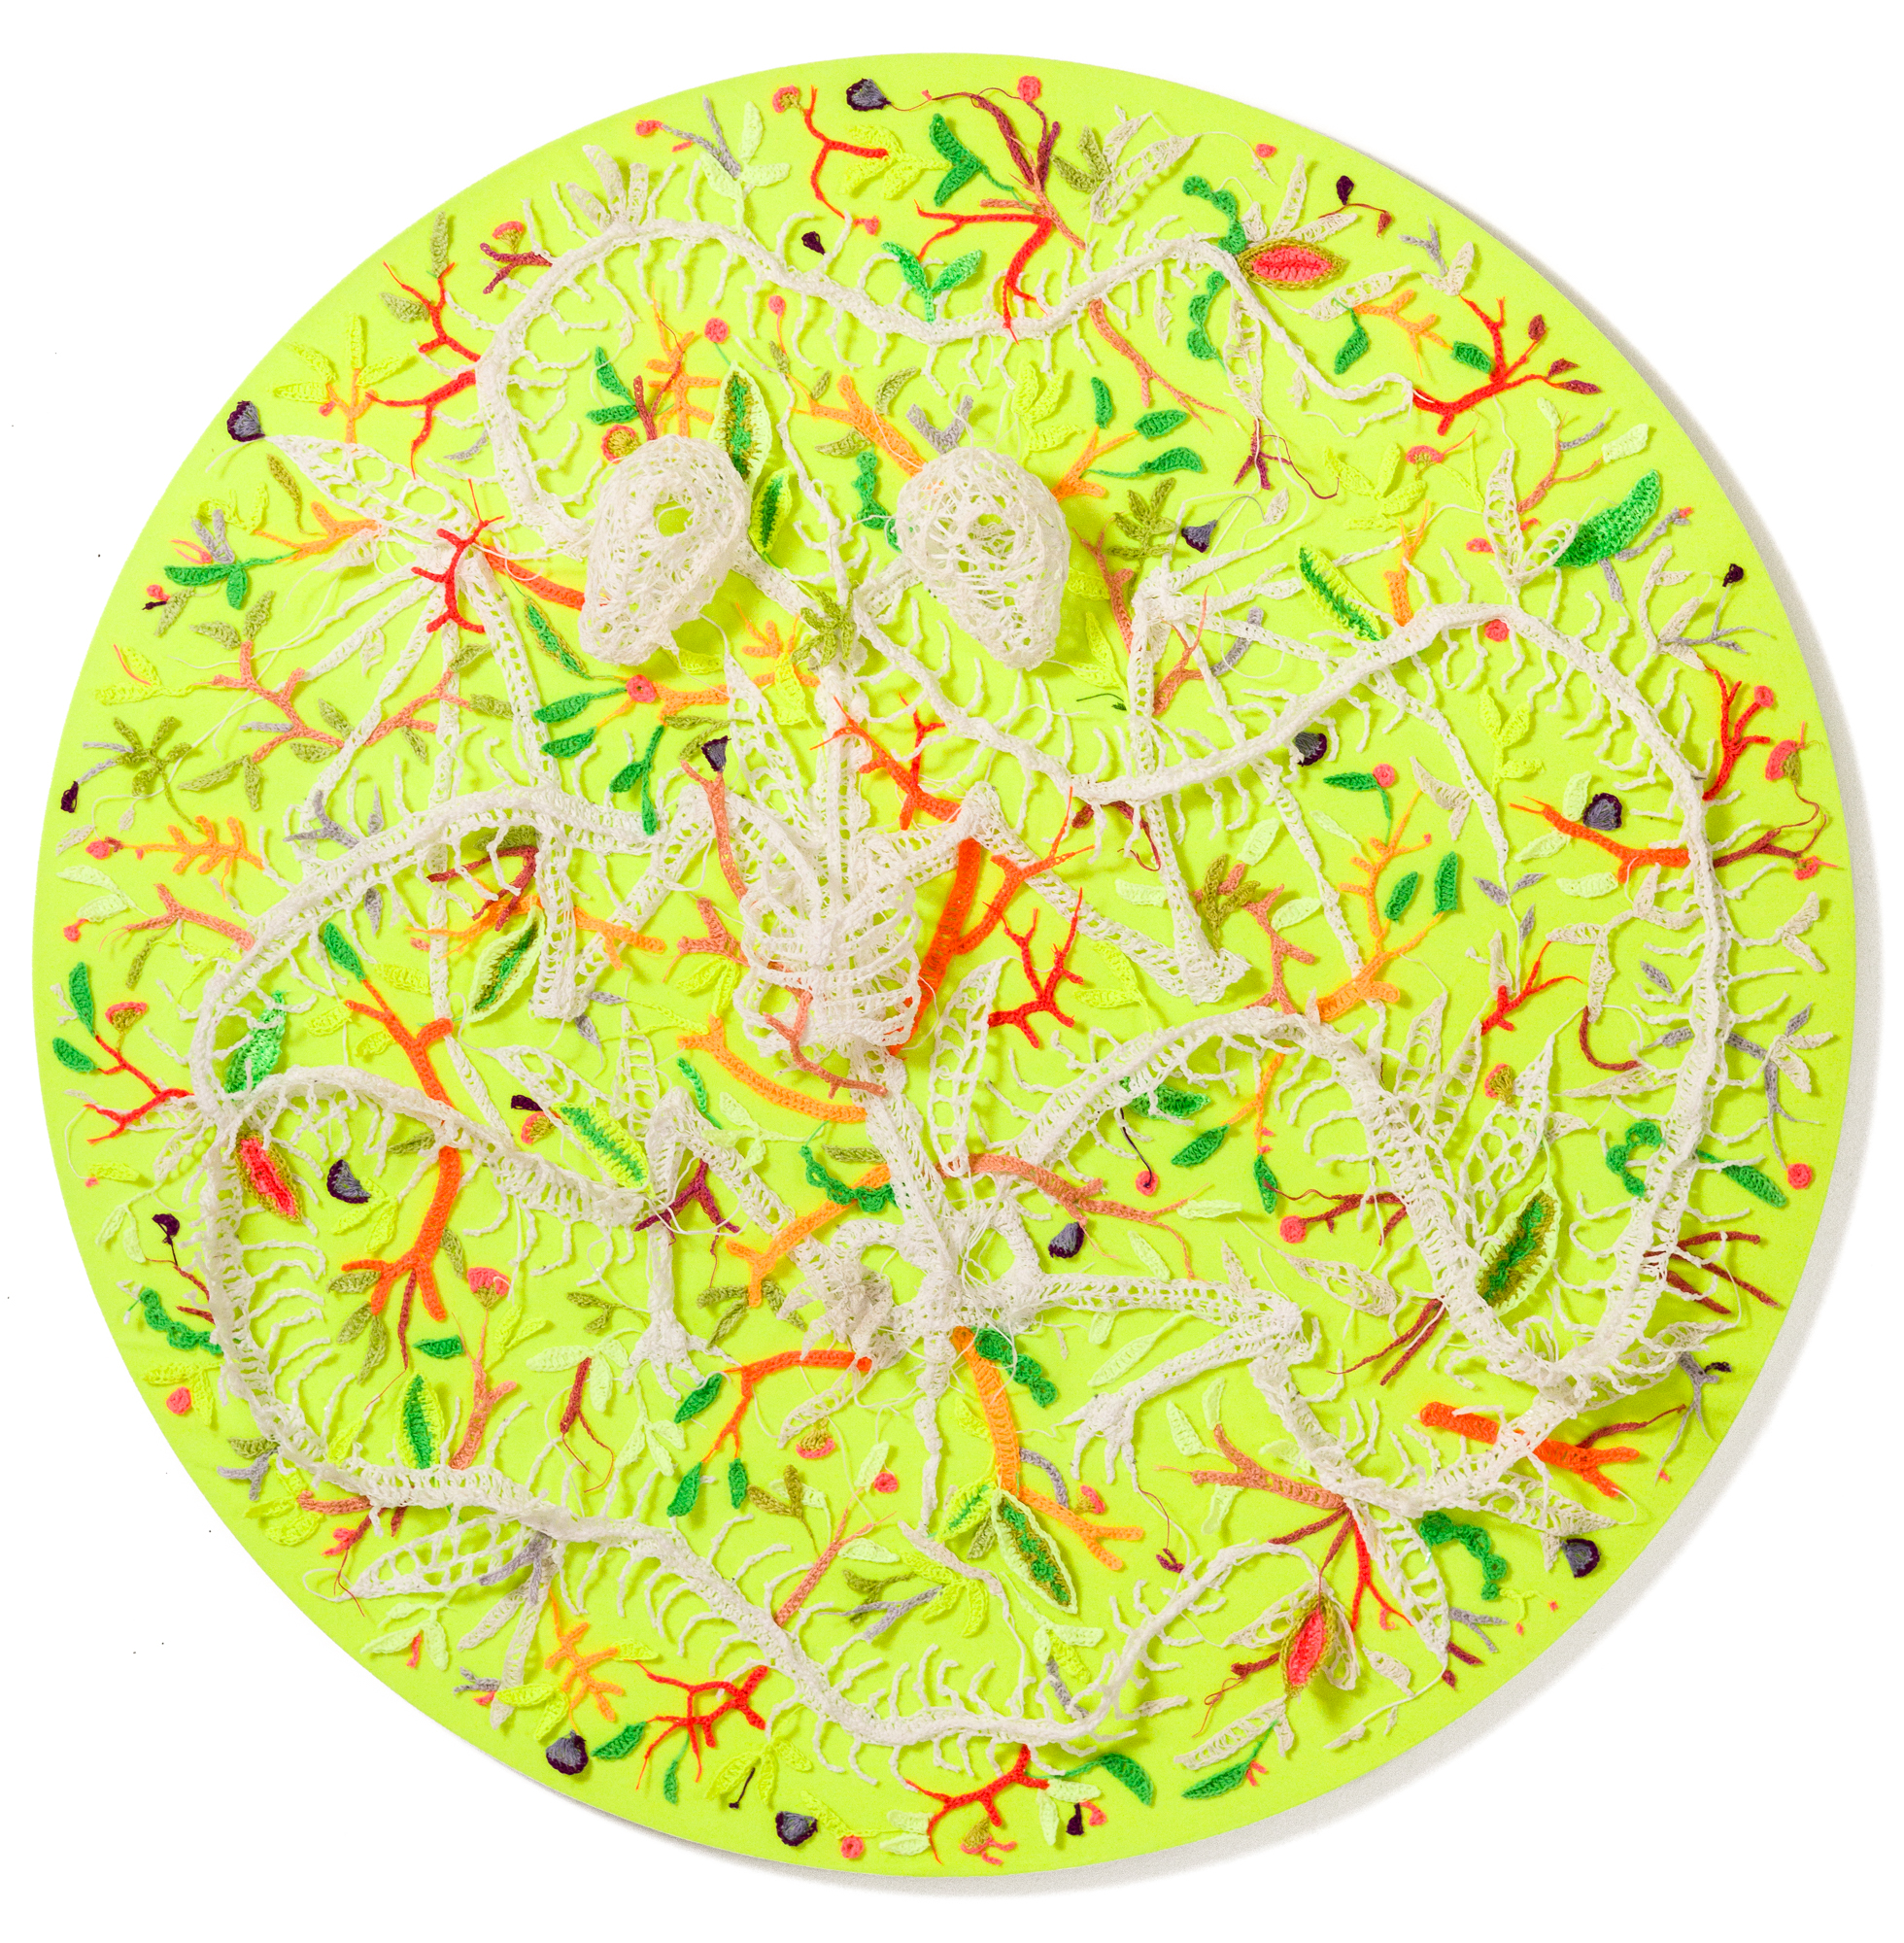 A circular composition of crocheted fiber that looks like tiny skeletons on a neon yellow background.